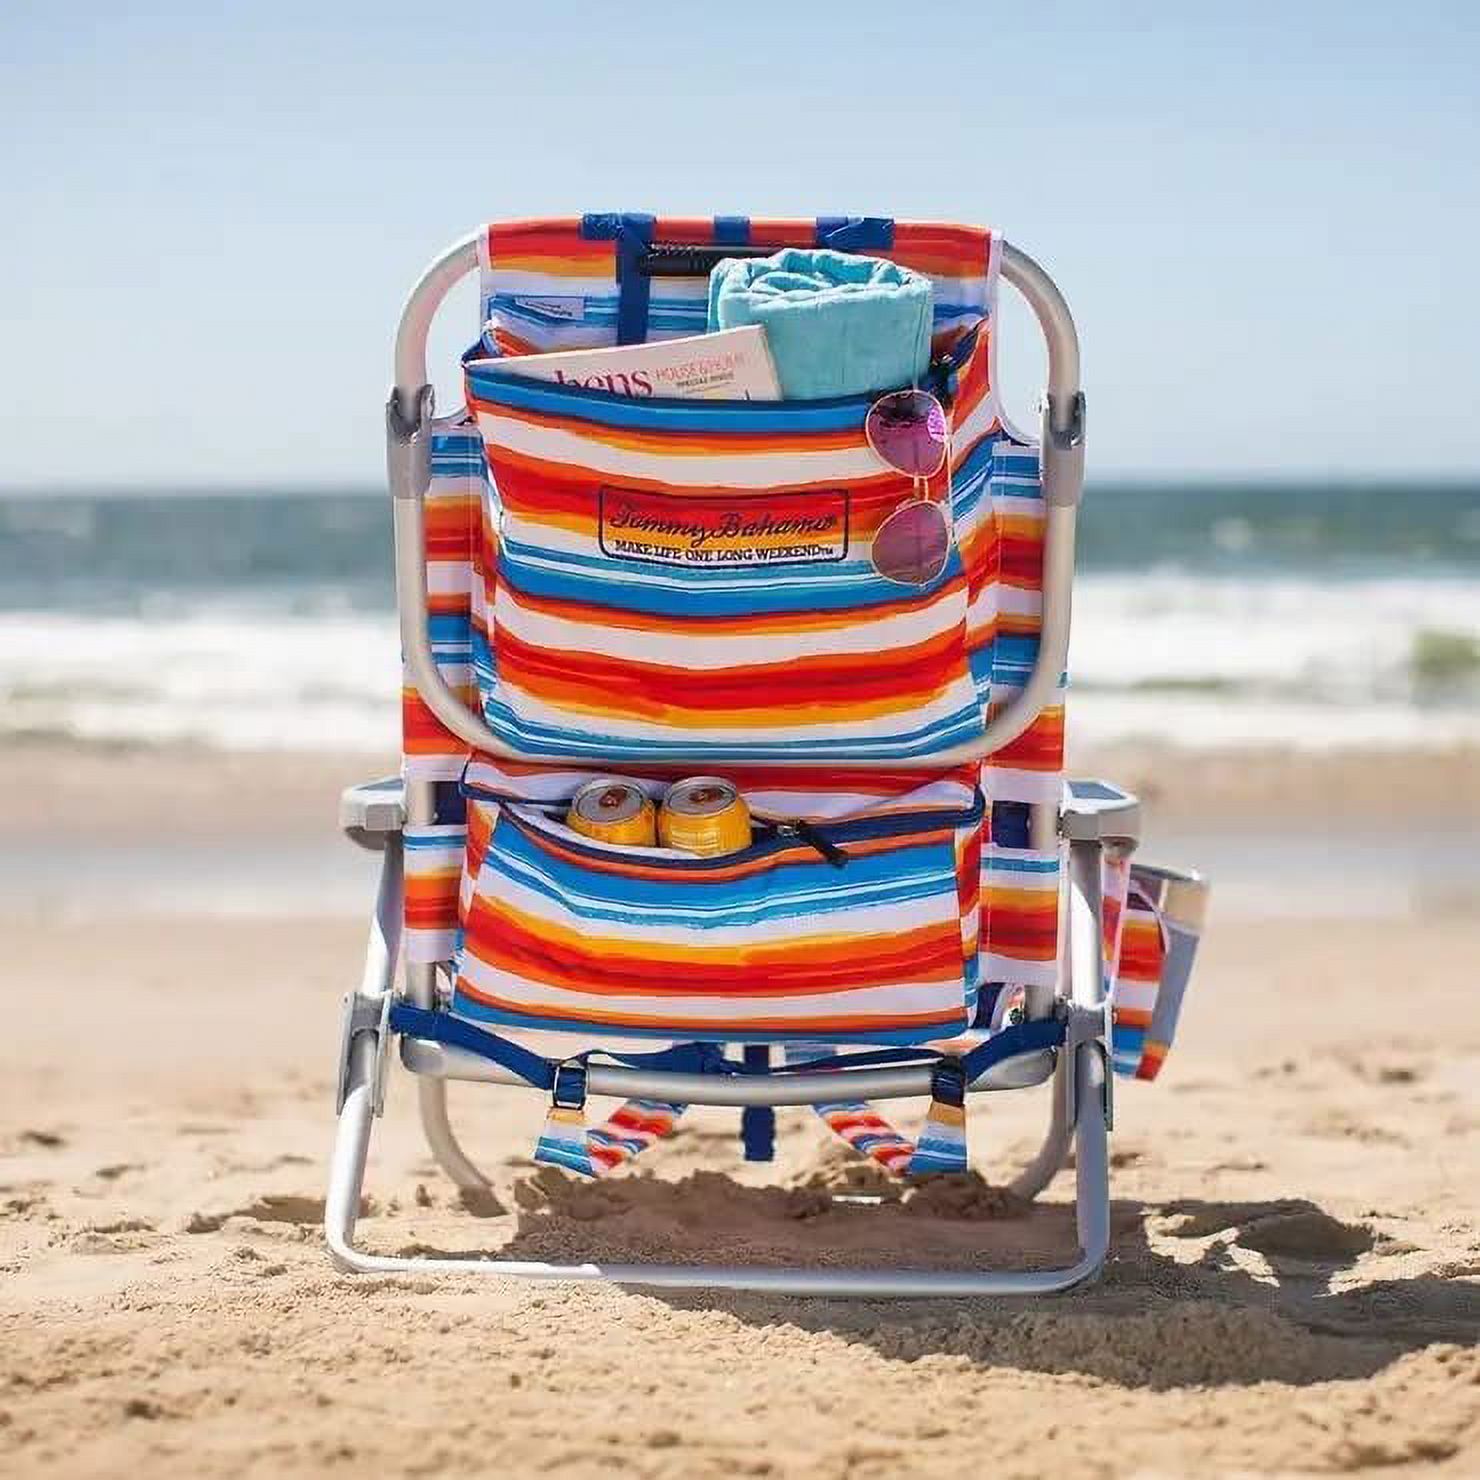 Tommy Bahama Backpack Beach Chair-New 2022 Designs-5-Position Classic Lay Flat-Insulated Cooler Towel Bar-Storage Pouch Tropical Sunset - image 2 of 7